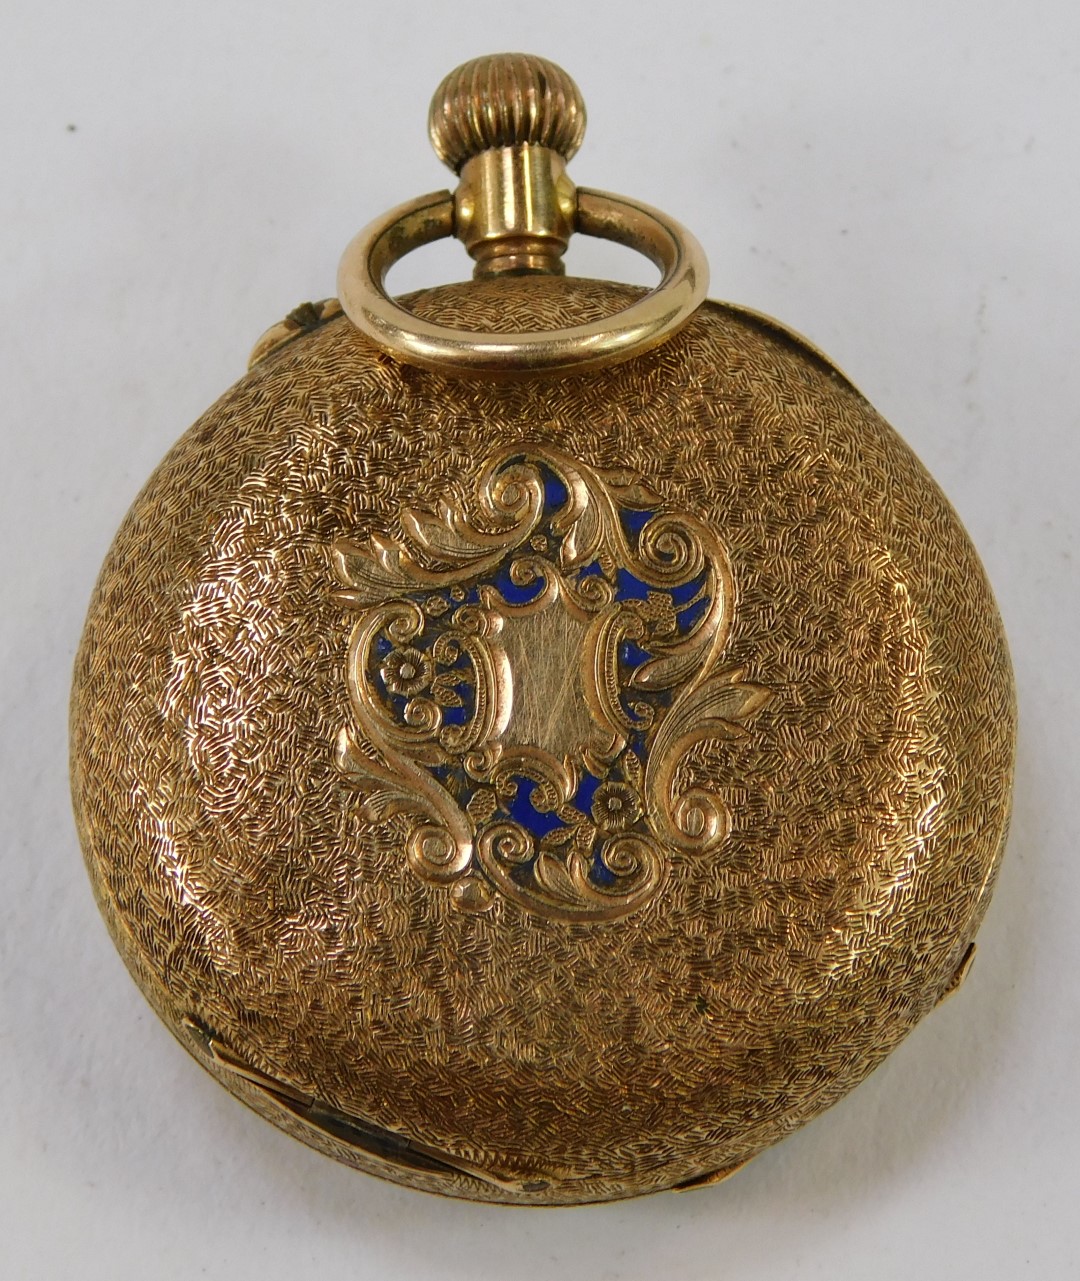 A Continental lady's pocket watch, the watch in a yellow metal casing, with scroll and blue enamel d - Image 2 of 3